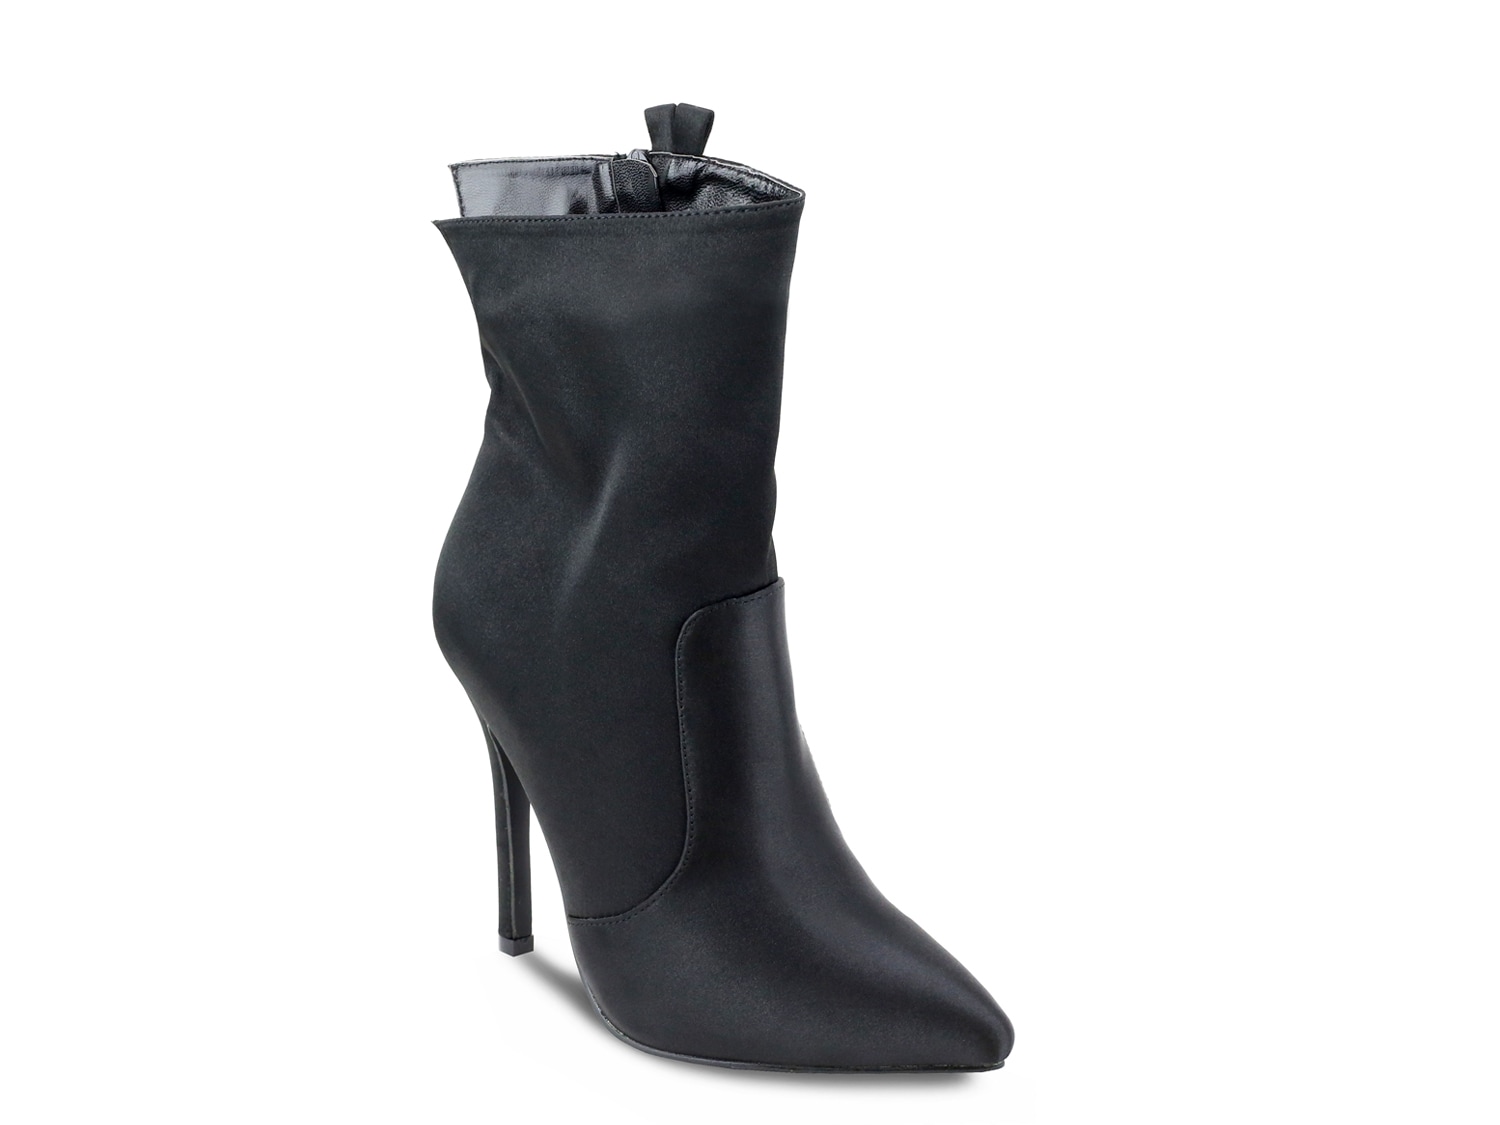 Olivia Miller Seaford Bootie - Free Shipping | DSW